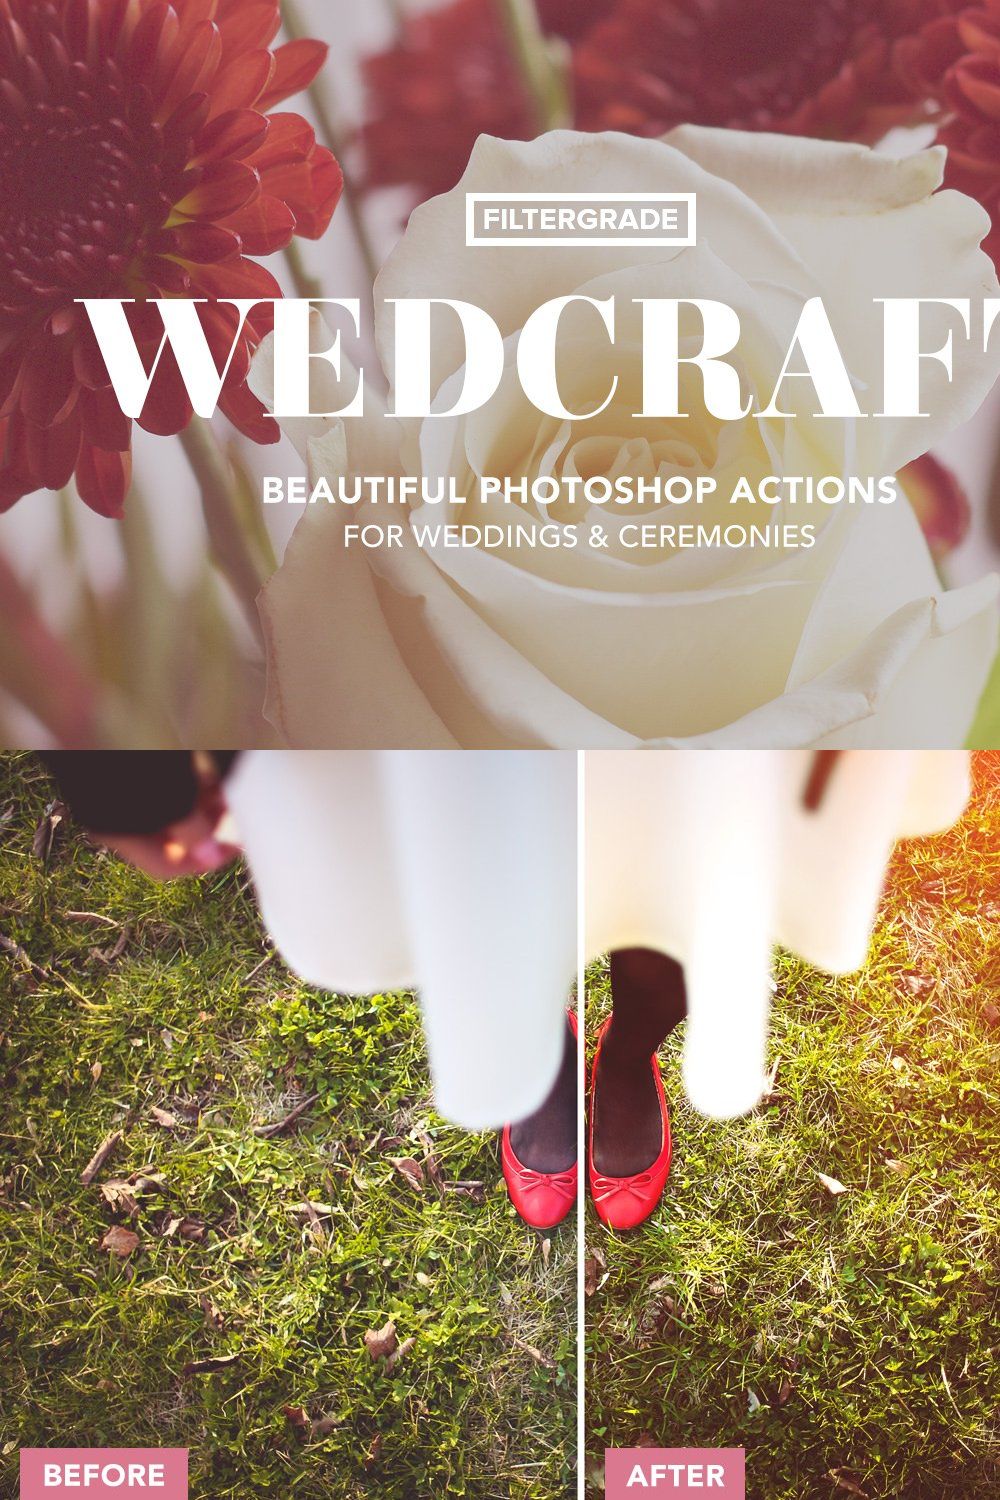 Wedcraft Wedding Photoshop Actions pinterest preview image.